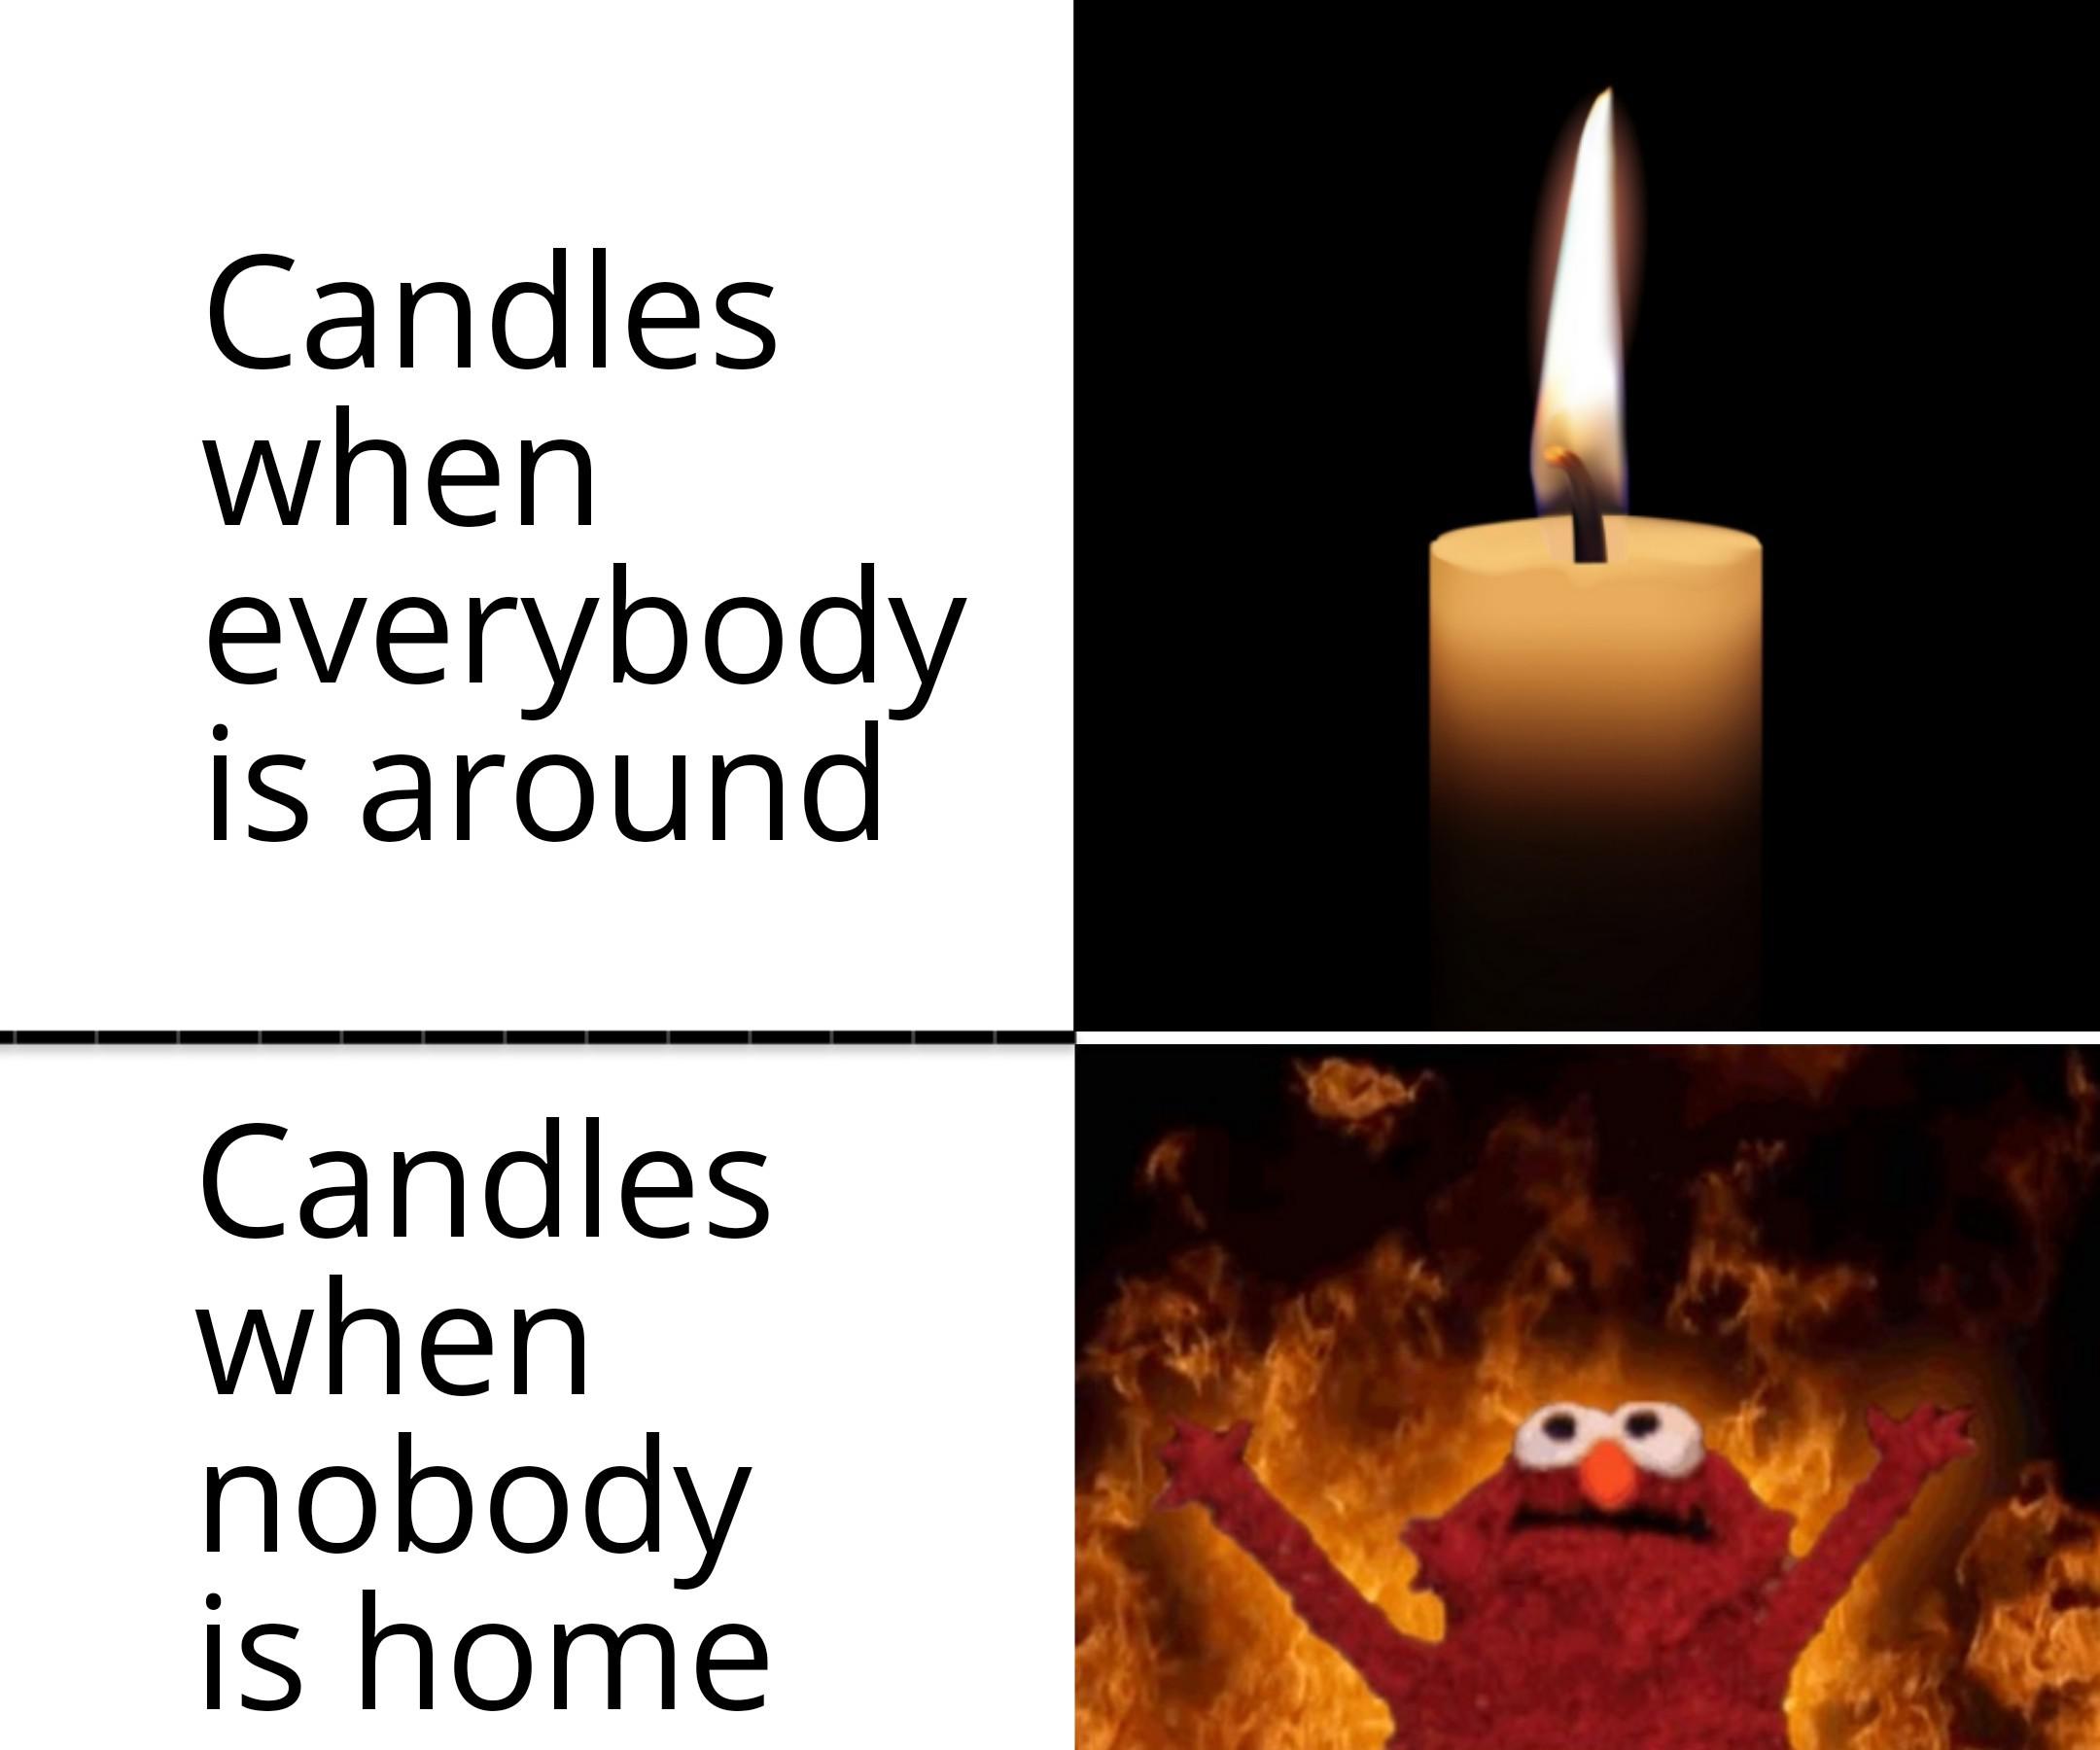 dank memes - elmo fire meme - Candles when everybody is around Candles when nobody is home